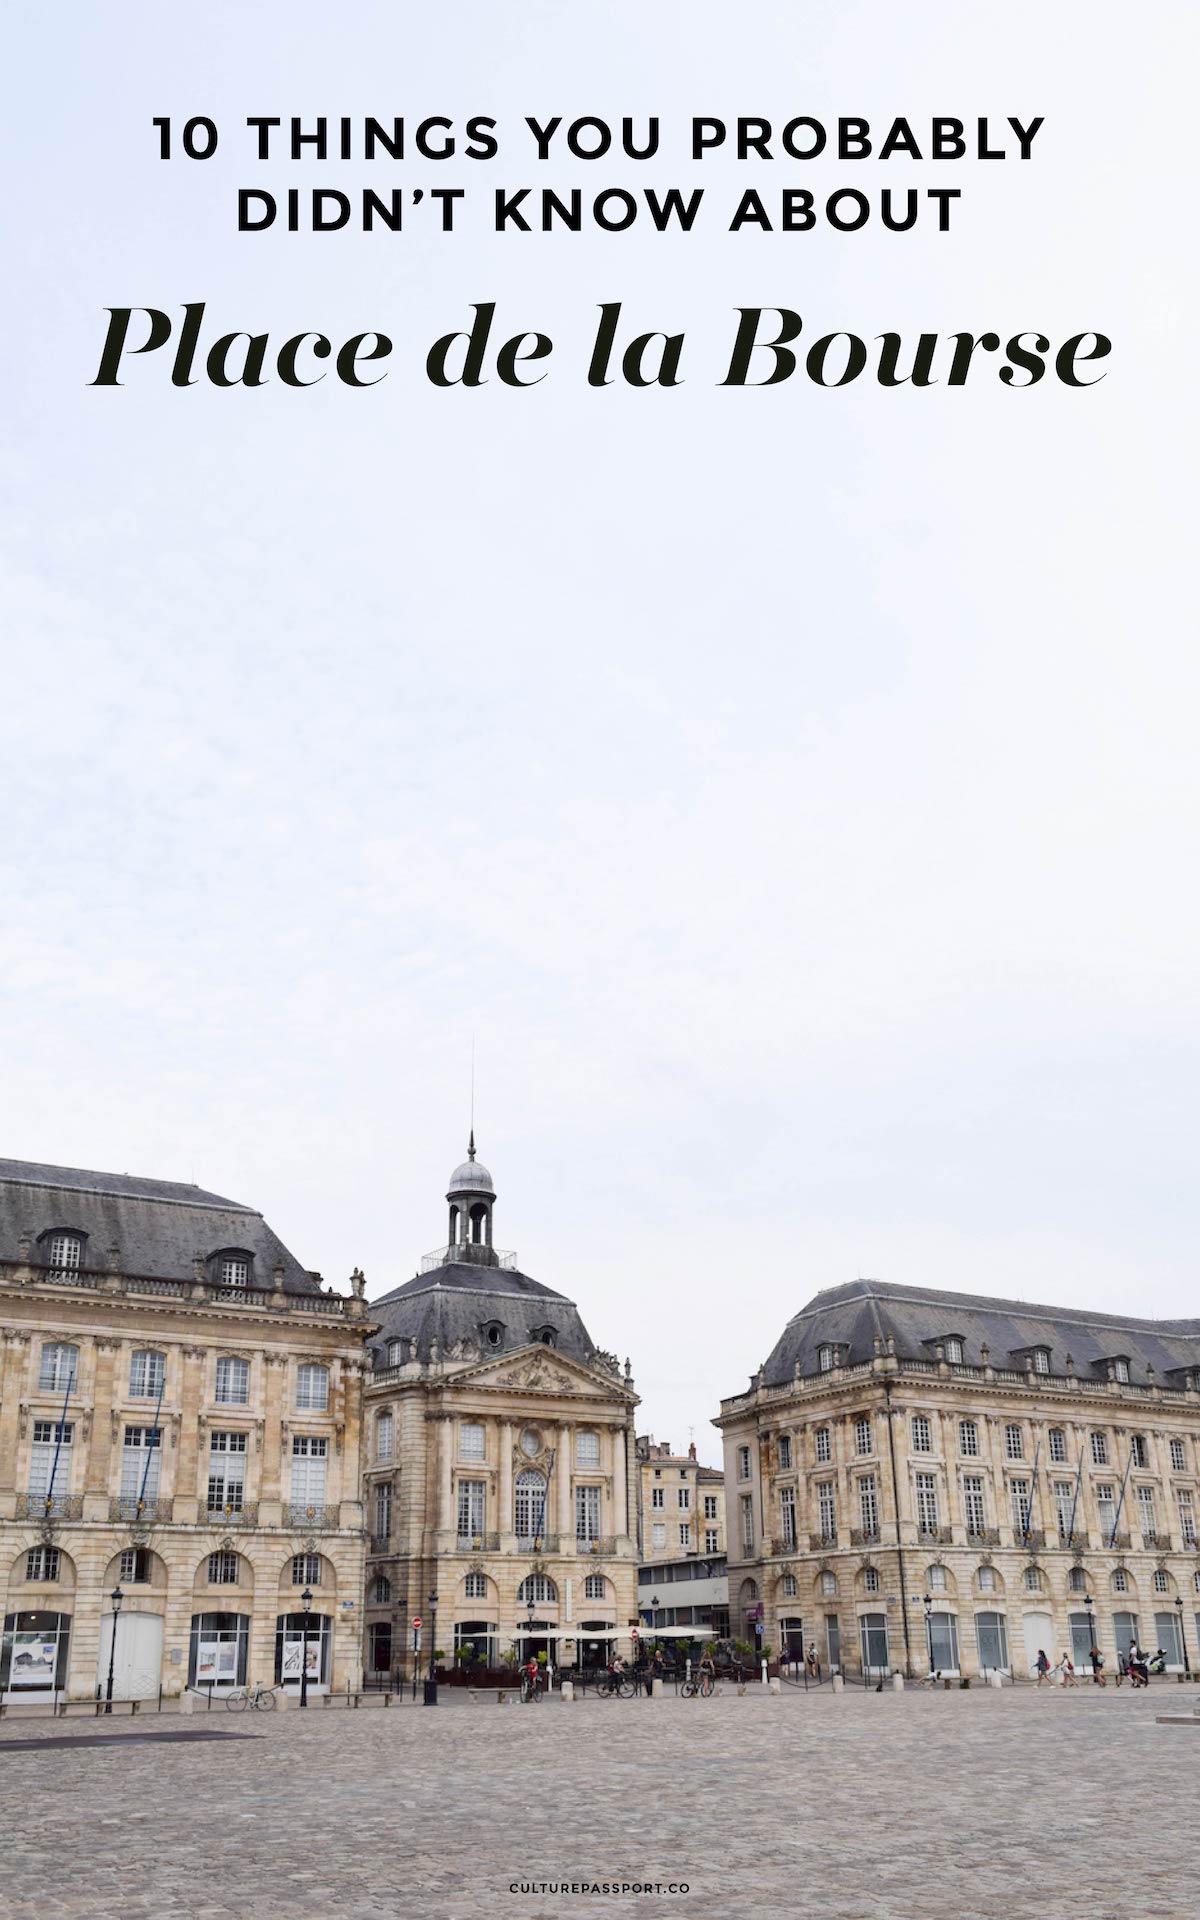 Things You Probably Didn't Know About Place de la Bourse